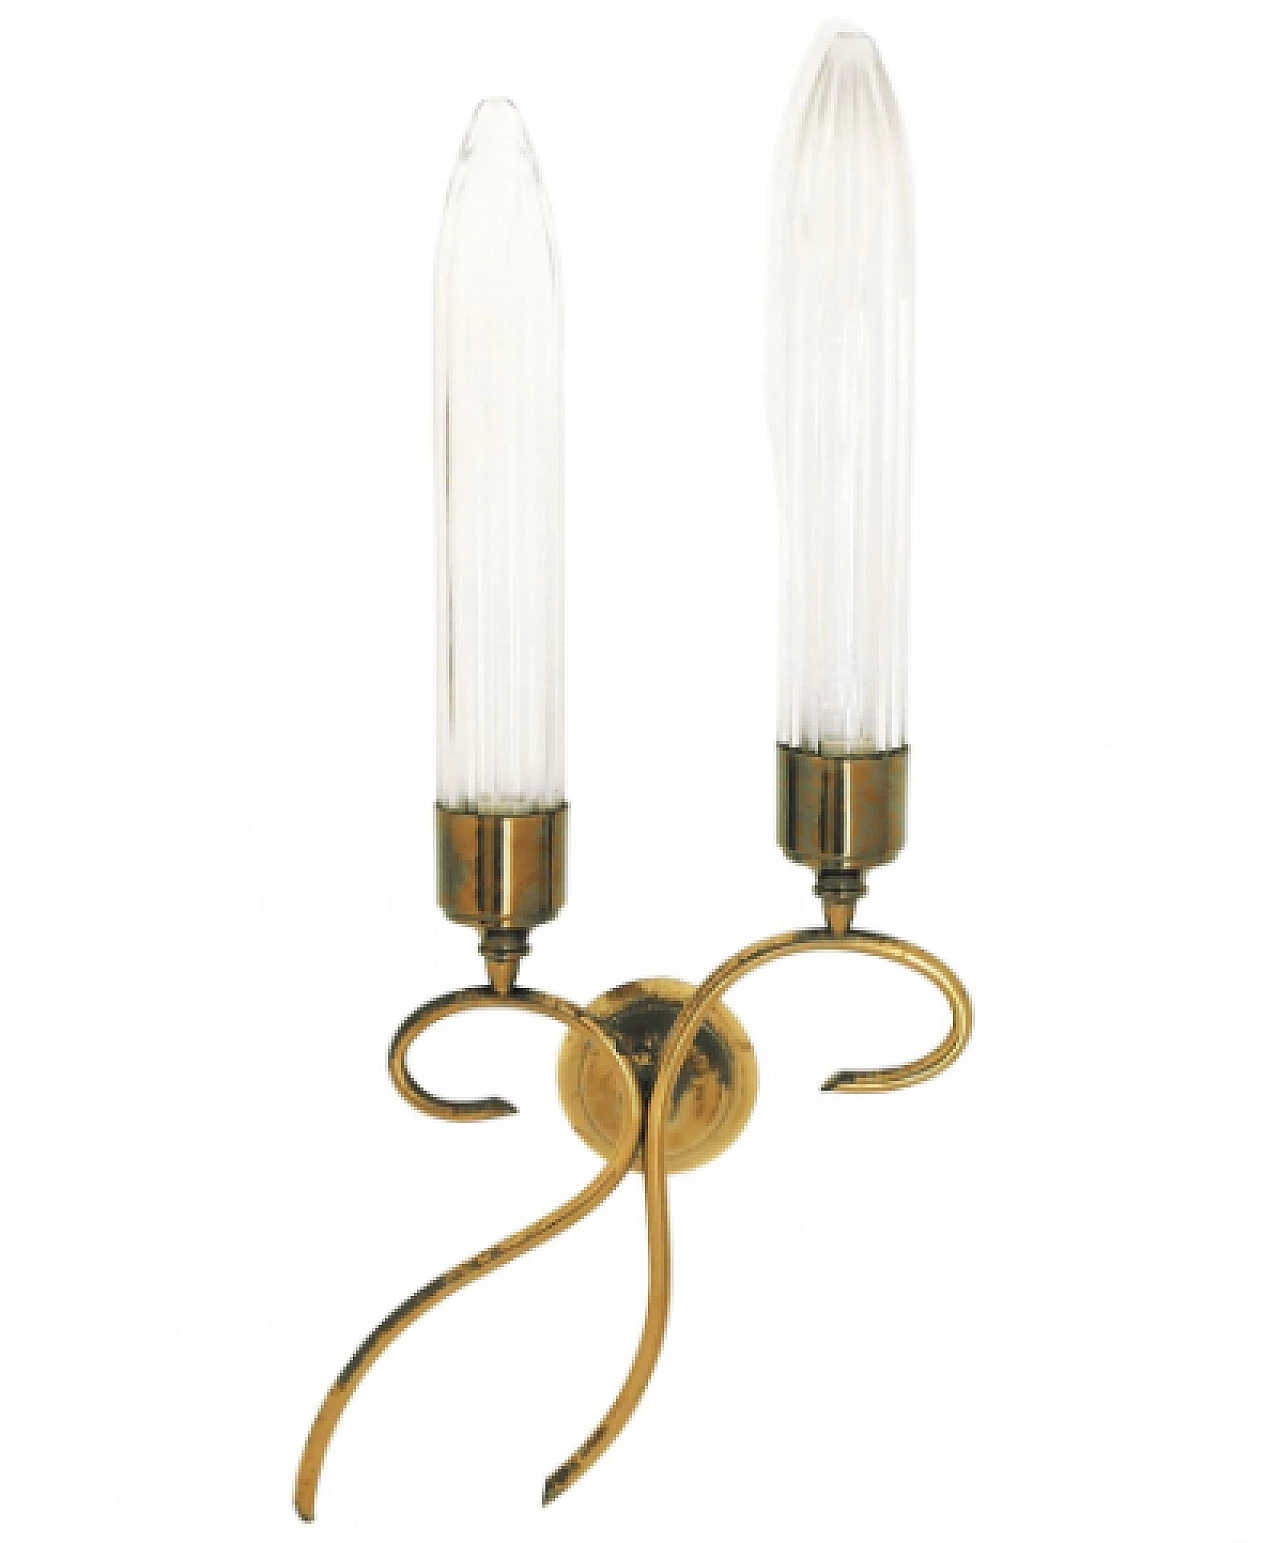 3 Two-light brass and glass wall lights by Seguso, 1950s 1